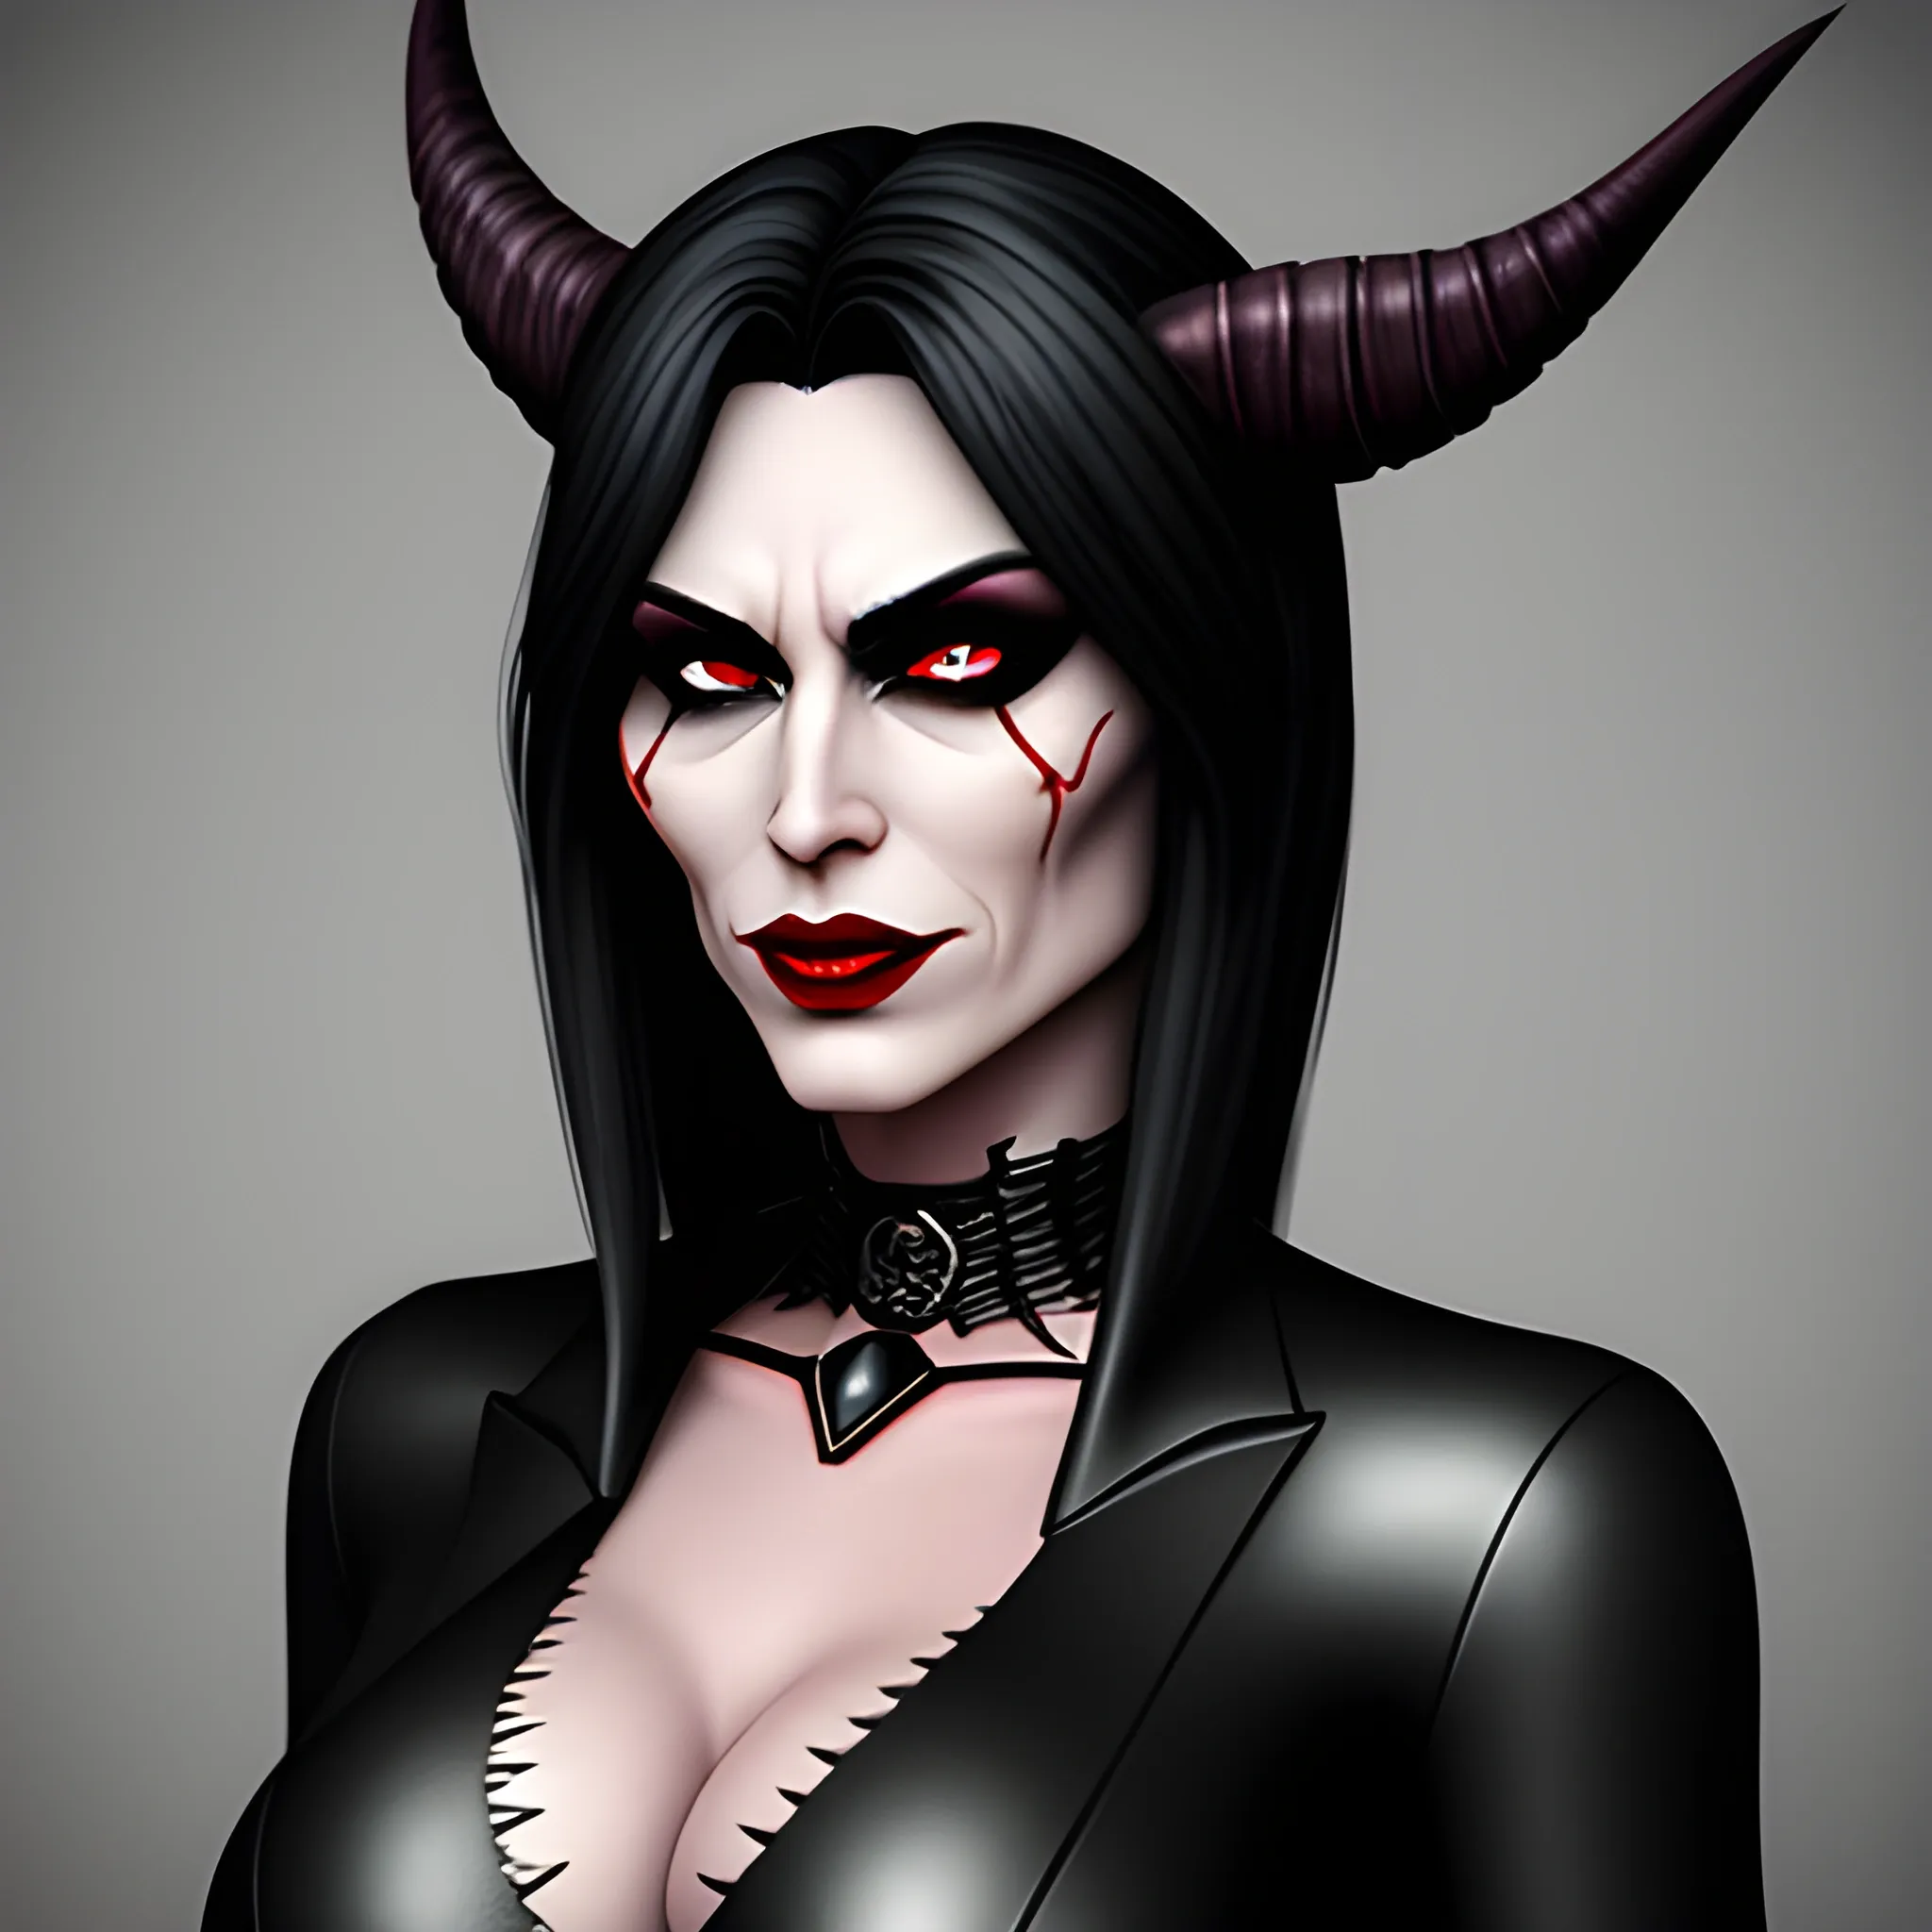 A demon girl in realistic style

